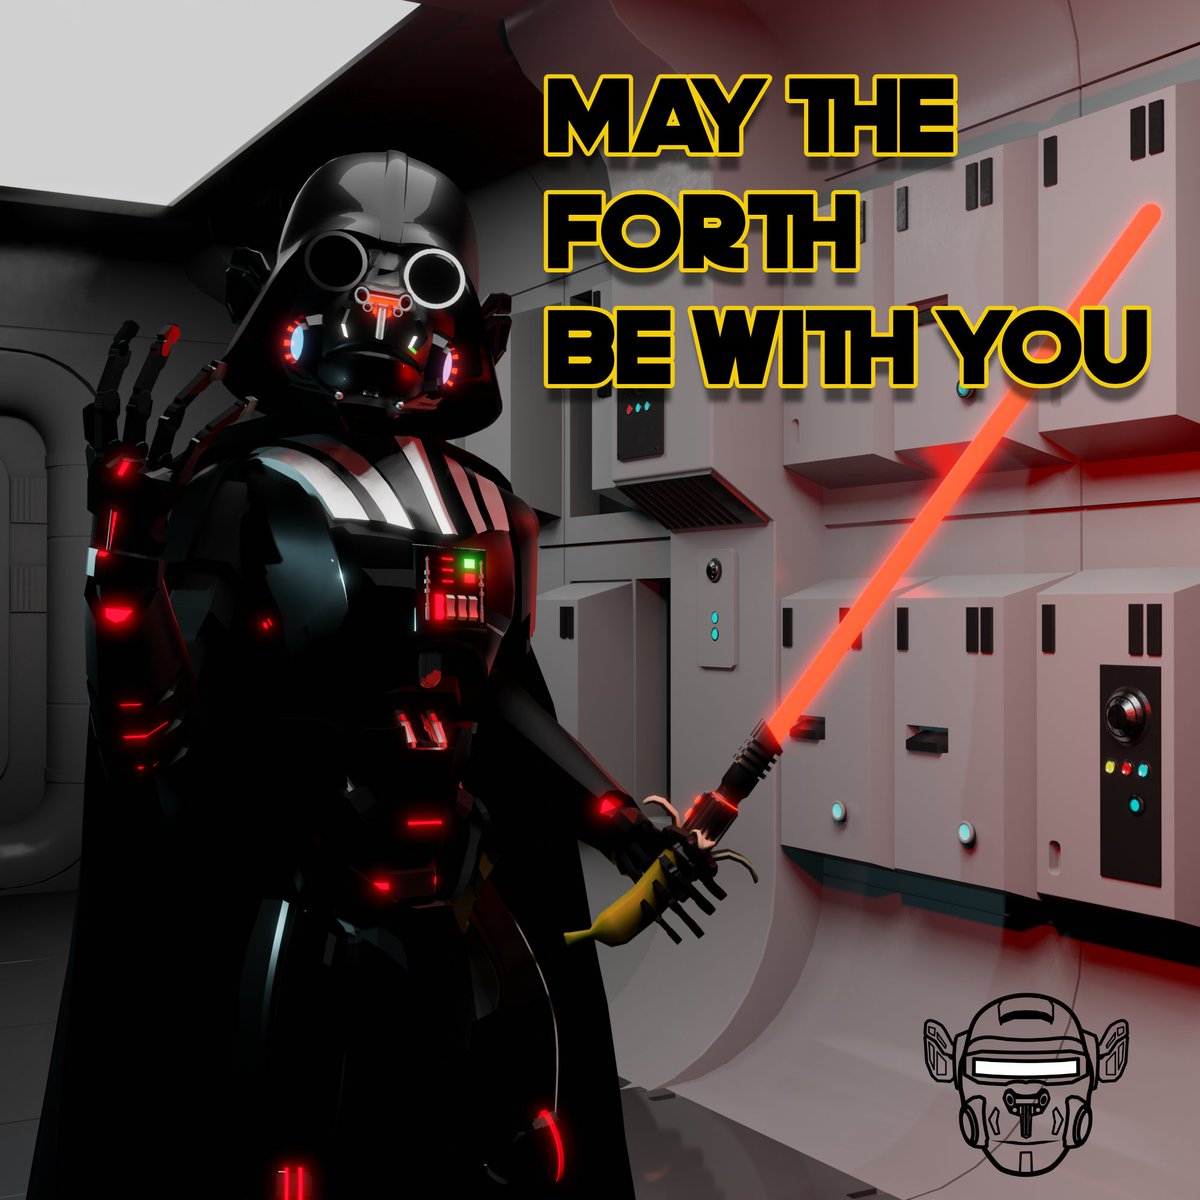 6 days left to grab this VaderBot-Ape from the @Nifty_Island marketplace! This #MetaBotApe was built in celebration of #Maythe4thBeWithYou. I know I spelled Fourth wrong. I'll fix that🤣🤣. Join the #DarkSide #NFTGaming #NiftyGang #NFT #NFTs #3DCreator